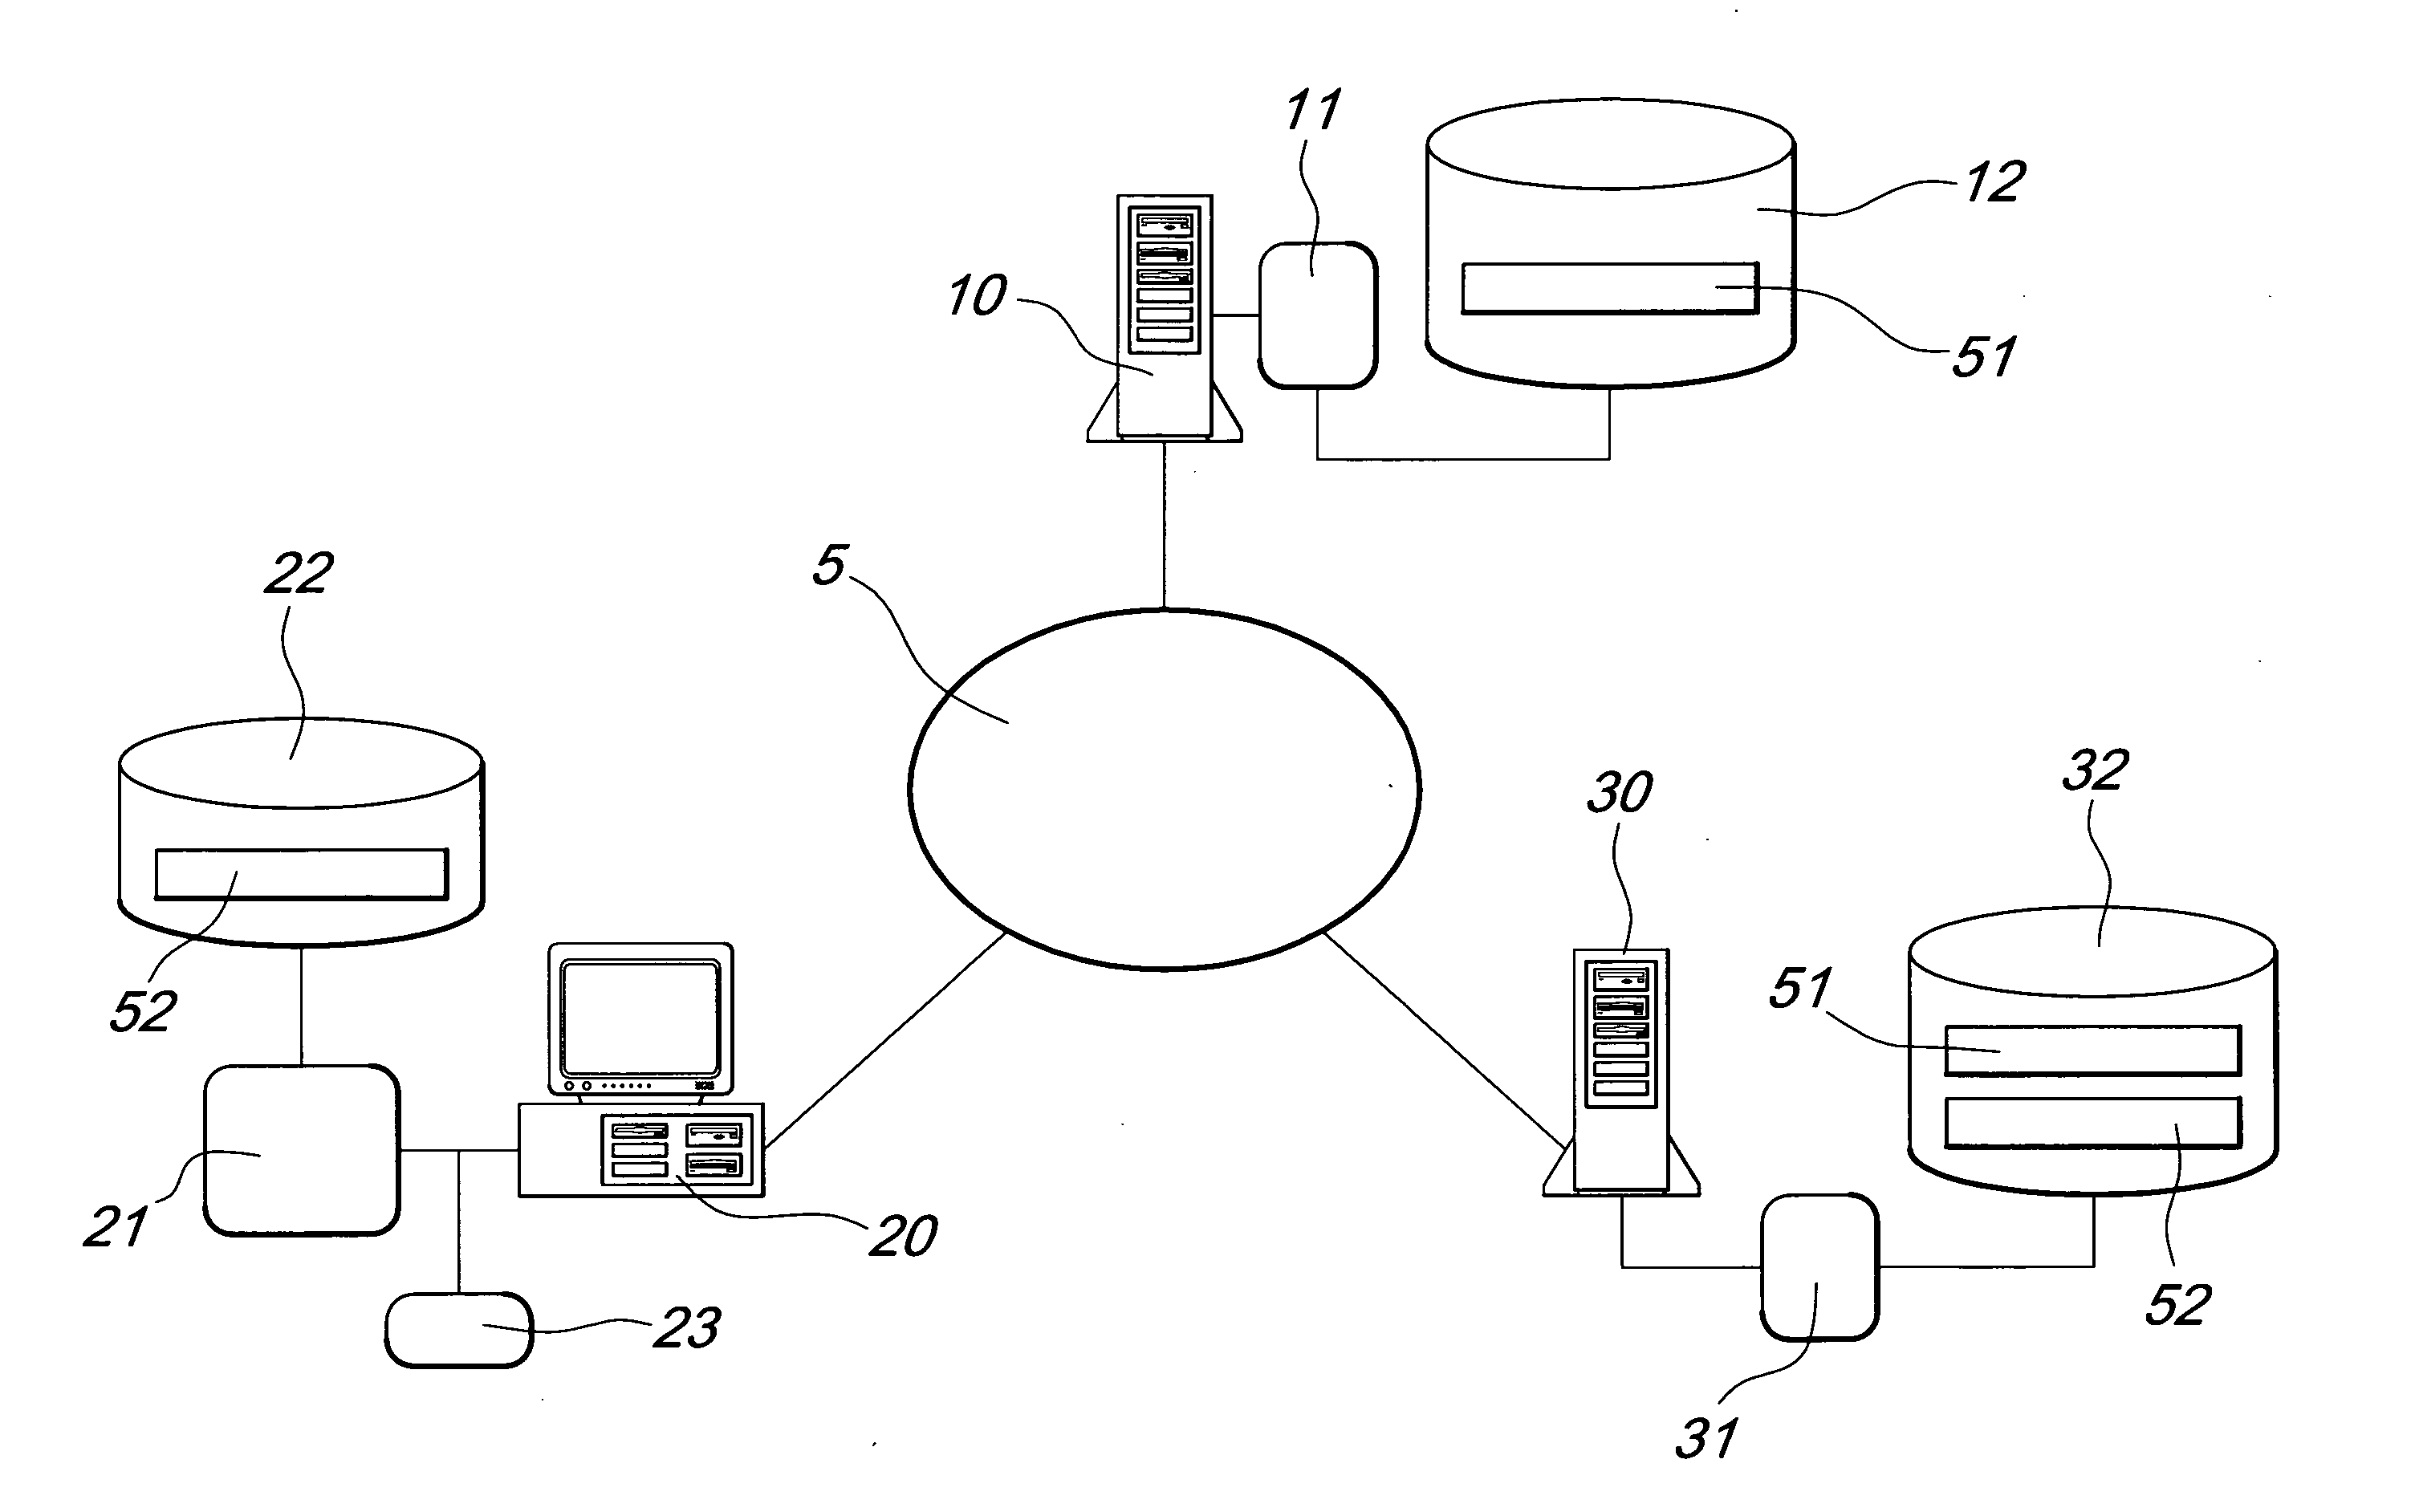 System and Method for Inherently Secure Identification Over Insecure Data Communications Networks